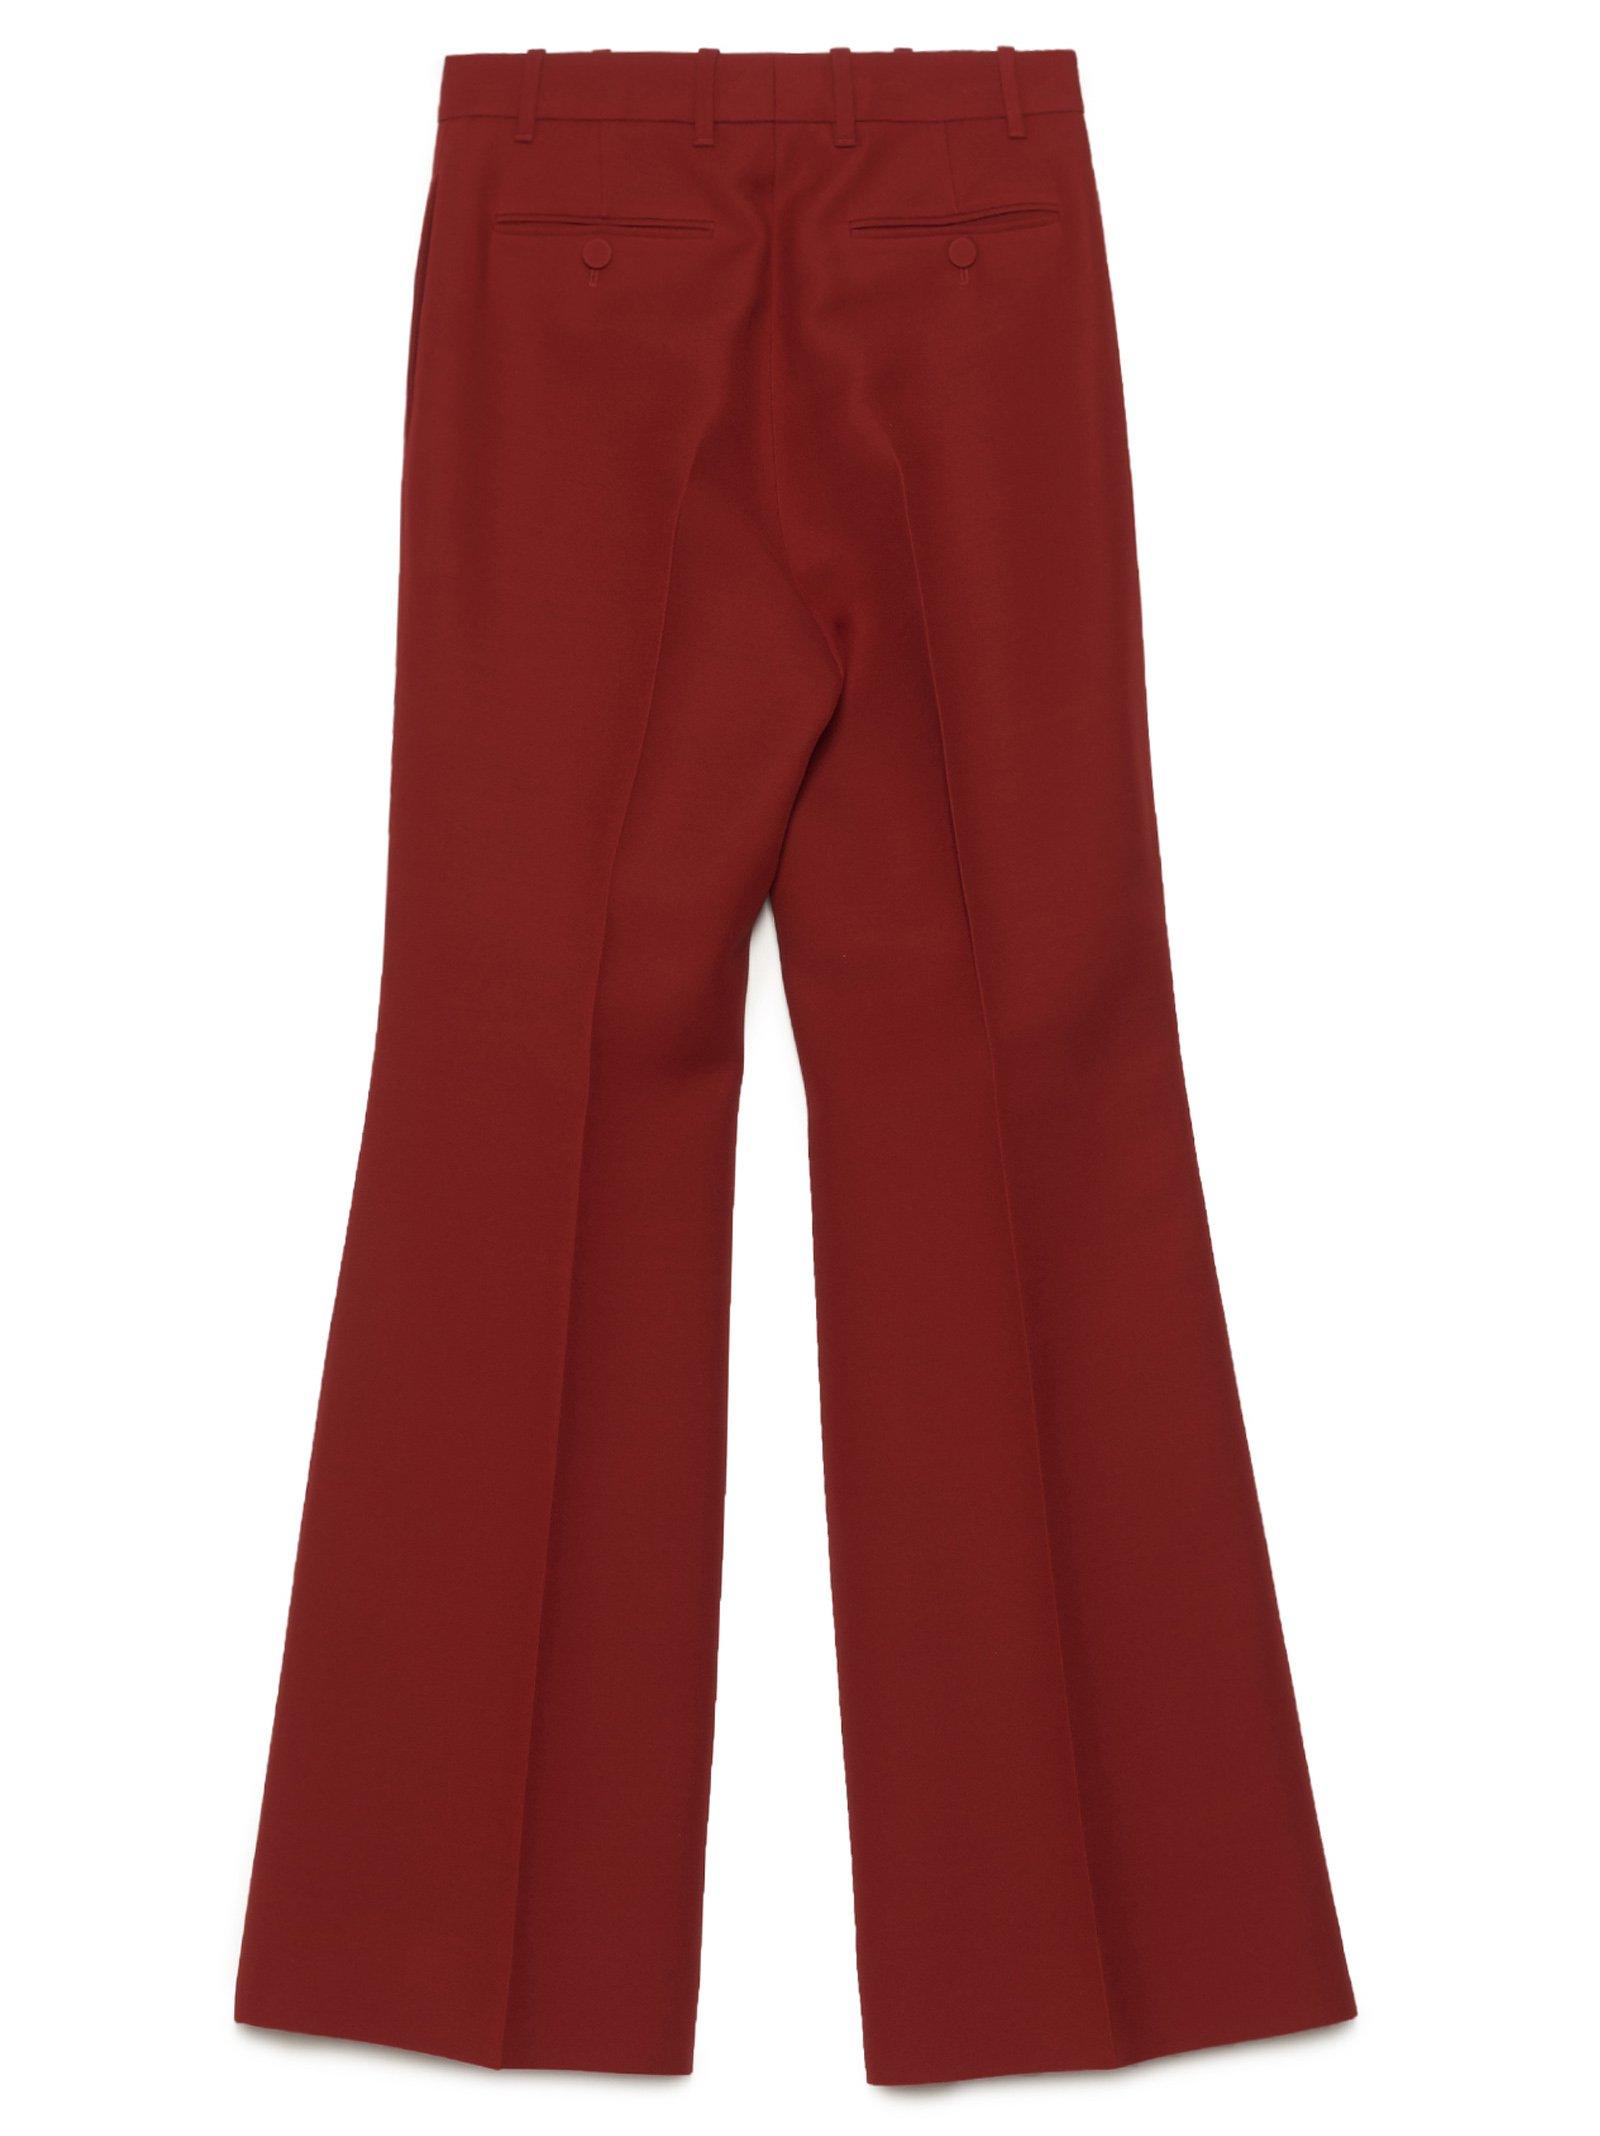 Dellio's Red Damask pants